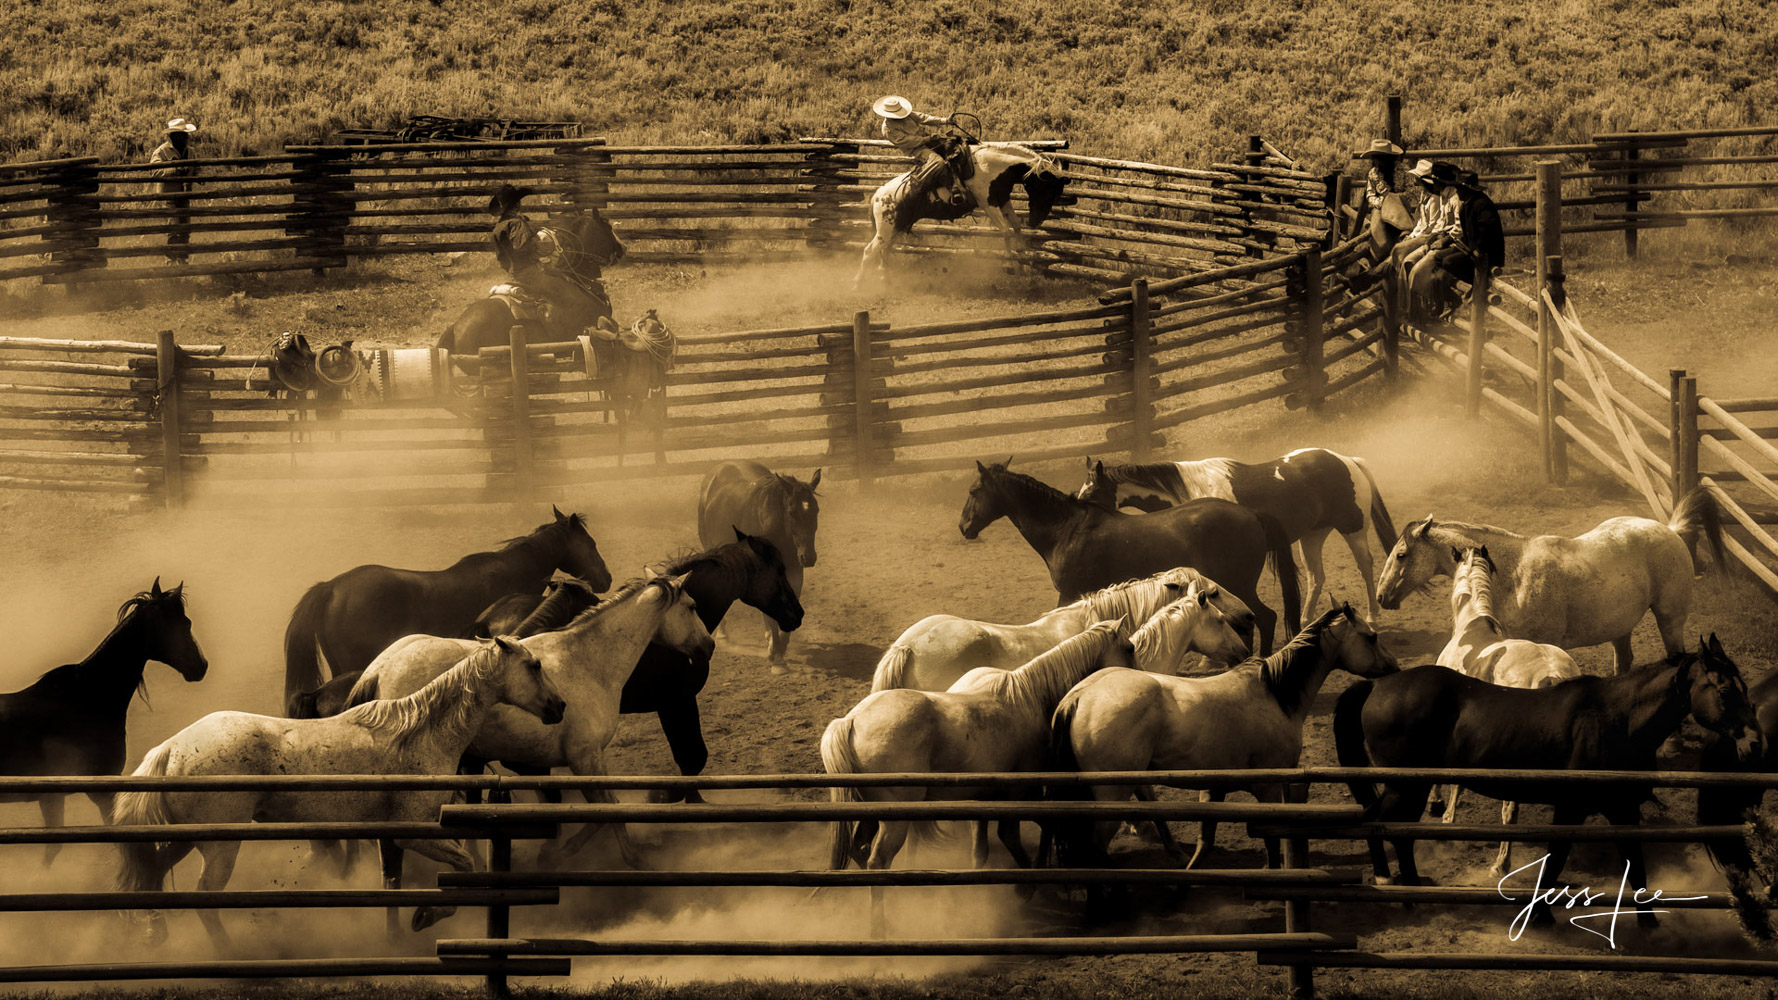 Fine Art Limited Edition Photography of Cowboys, Horses and life in the West. Wyoming cowboy living from the past at work today...